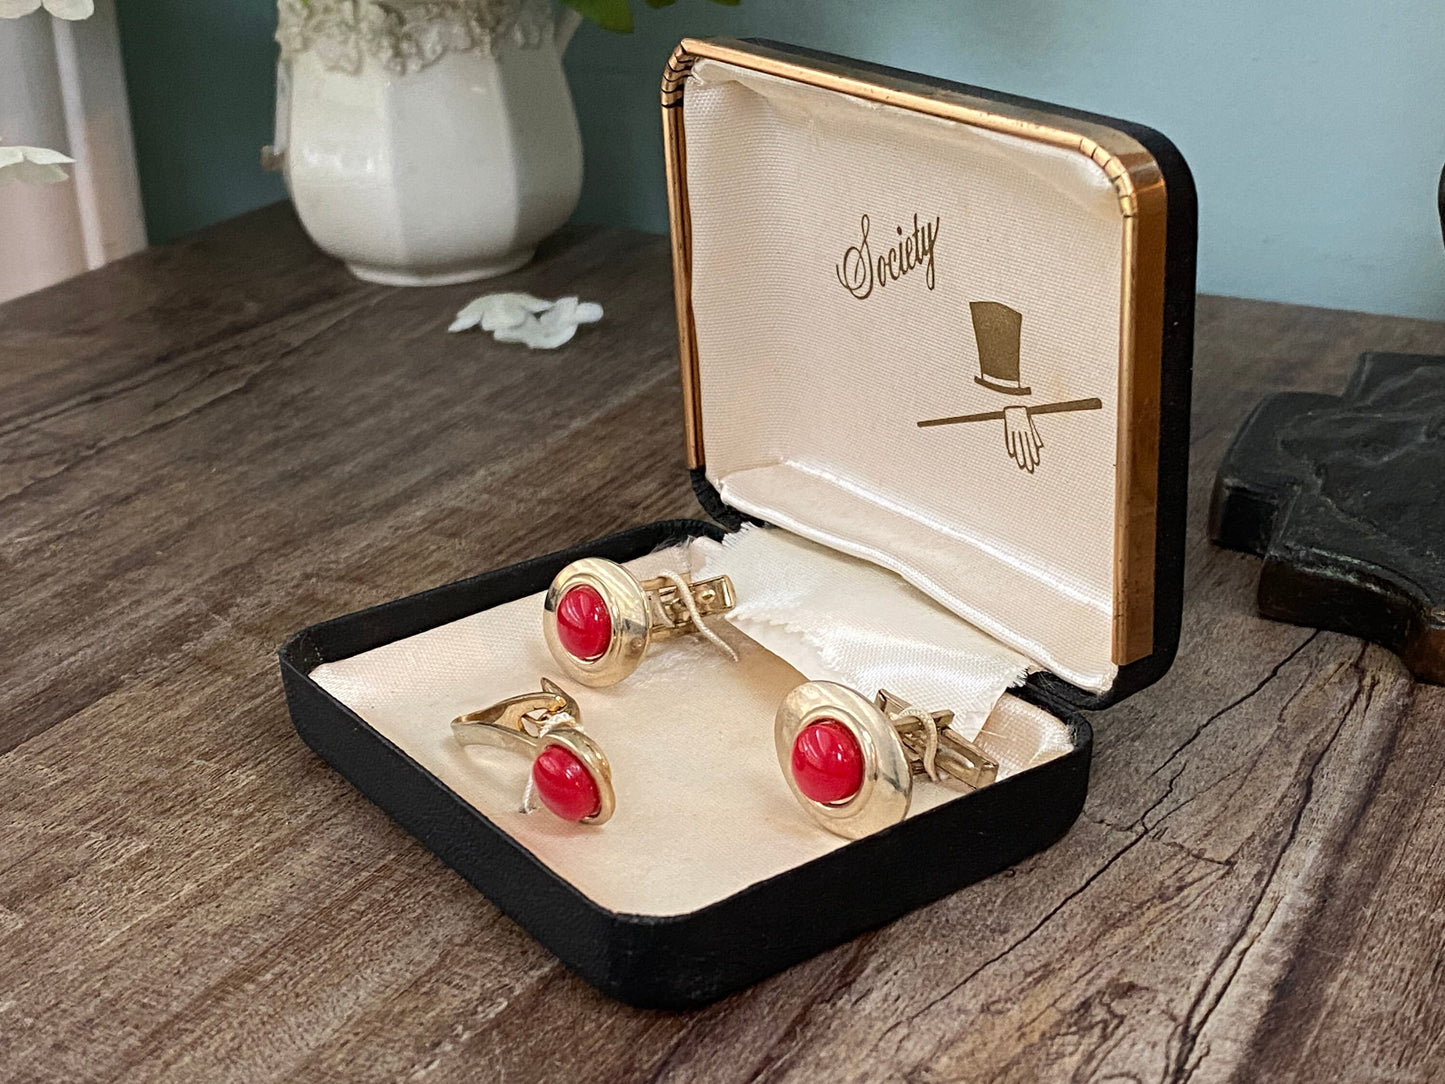 Midcentury Cuff Links and Tie Clip Jewelry Set